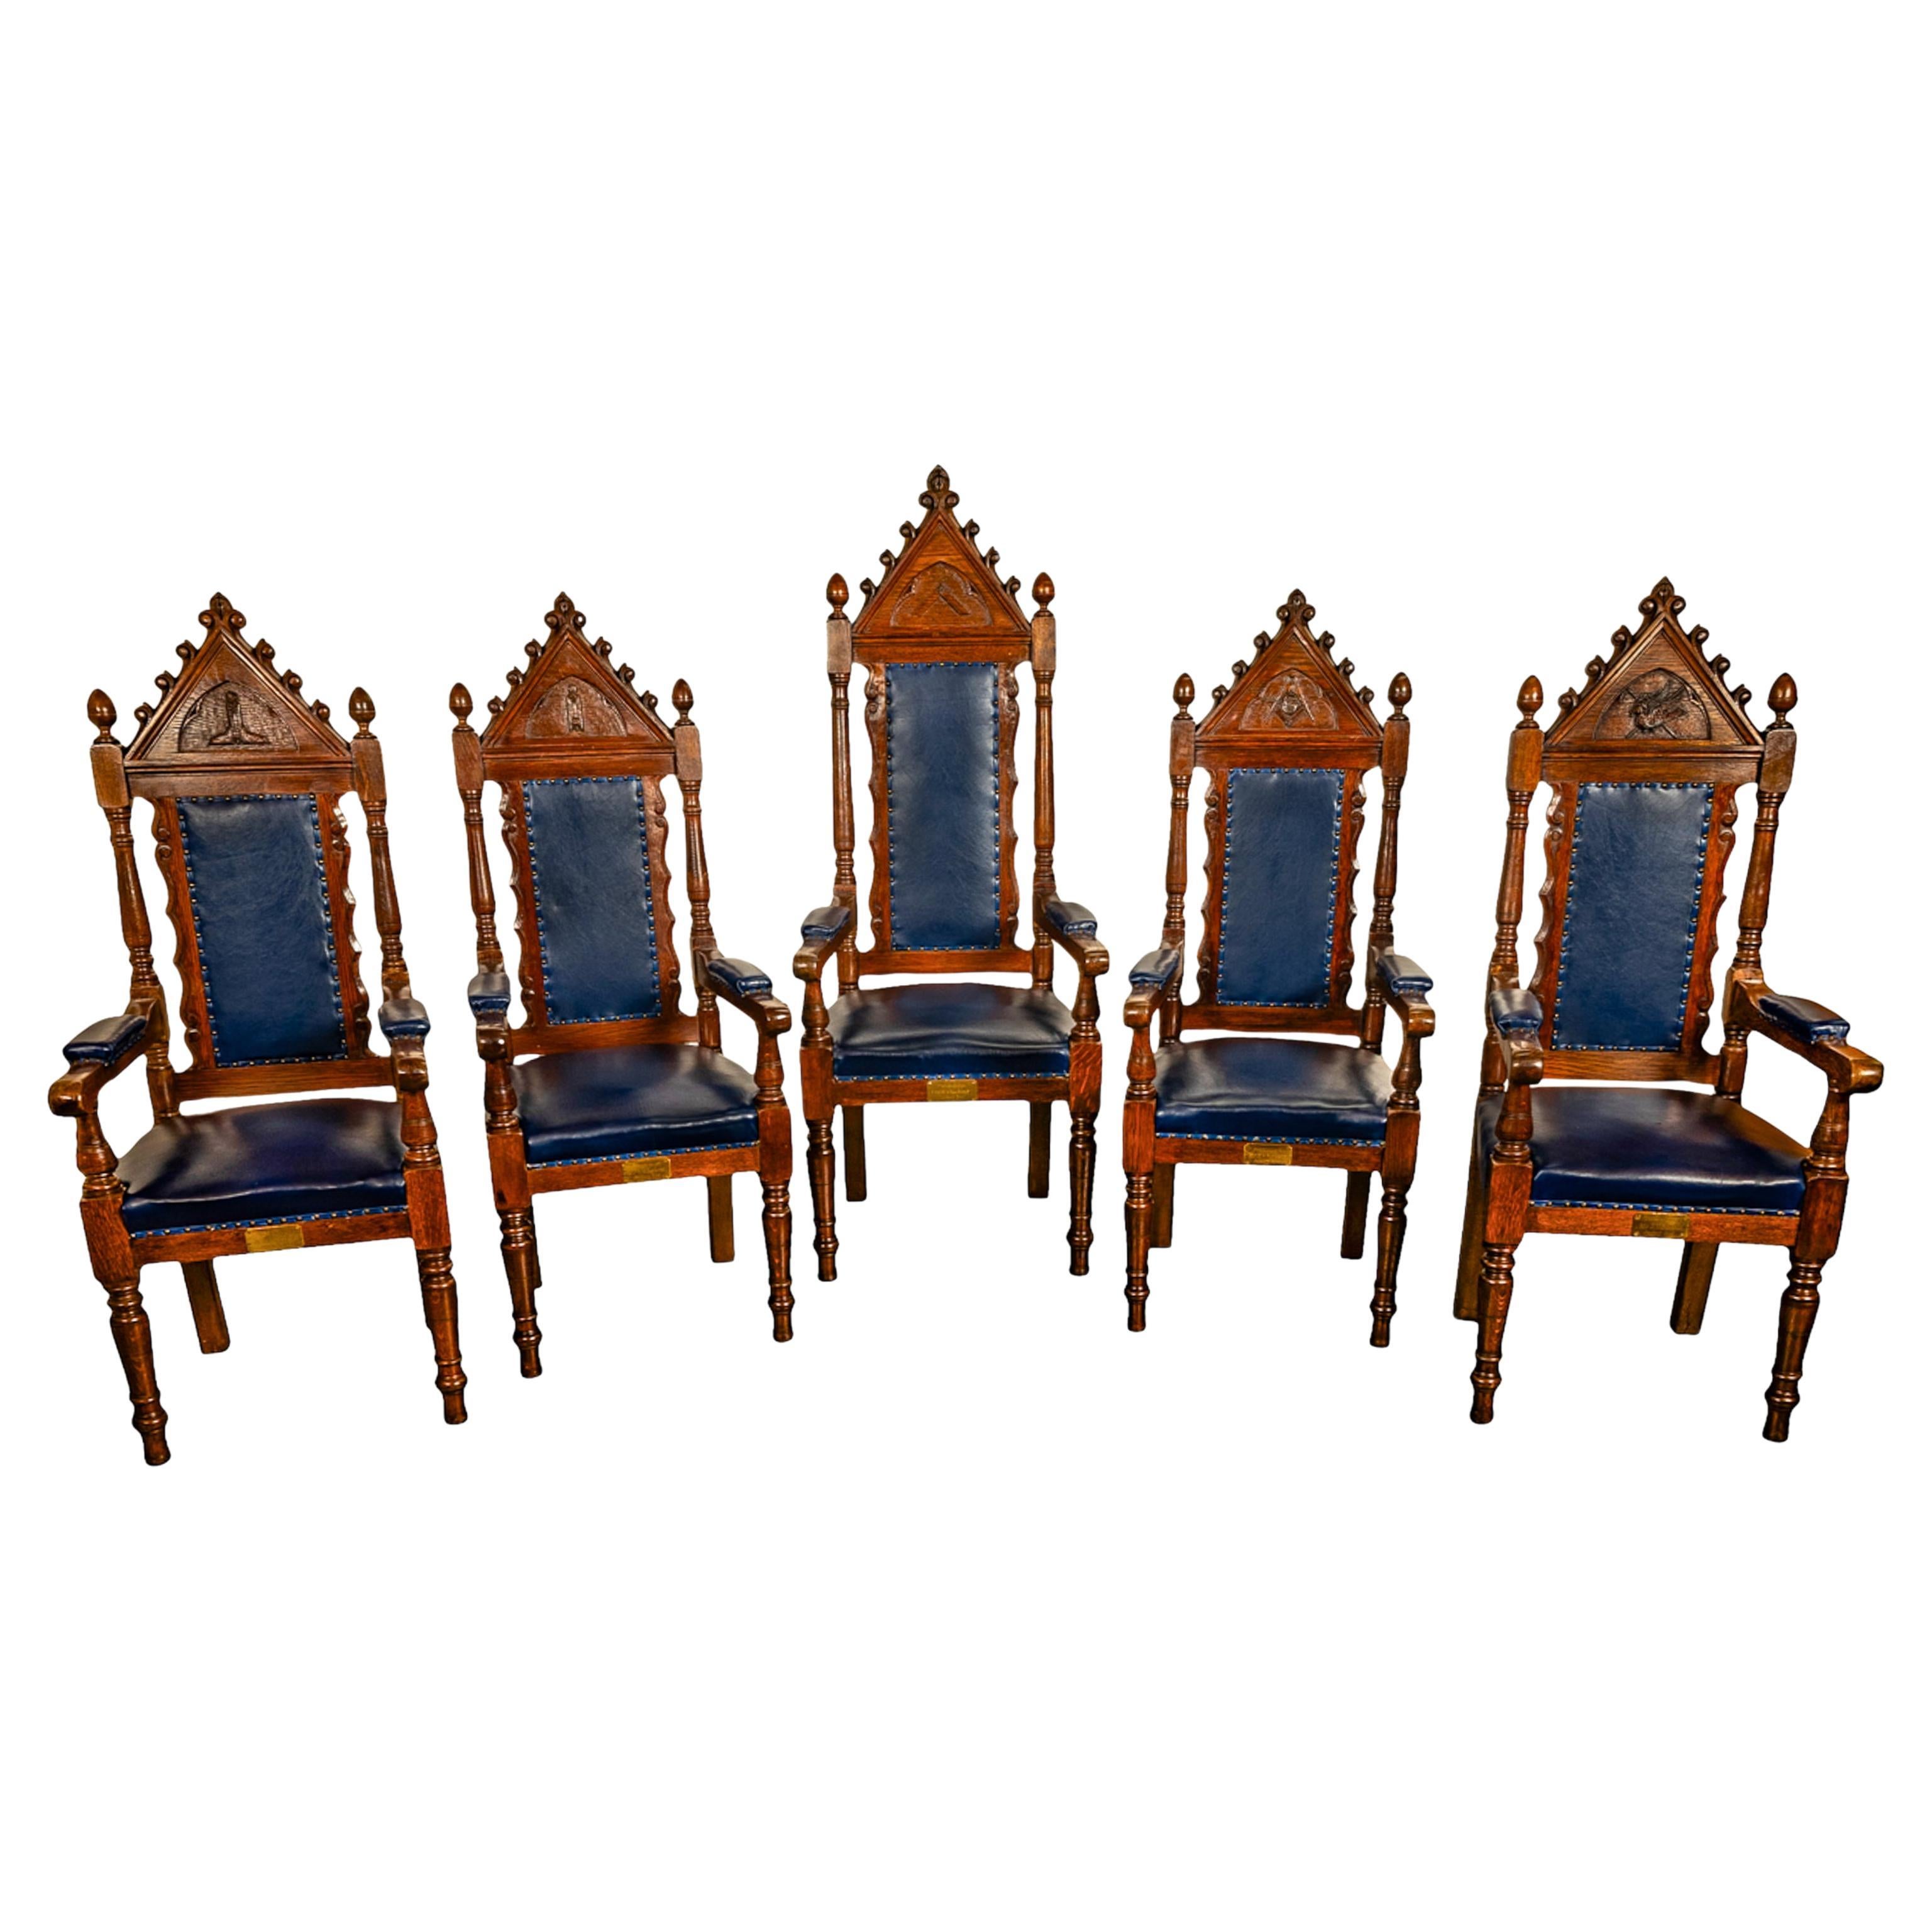 A fine set of five antique Gothic Revival oak & leather, Irish Masonic throne chairs, circa 1900.
Each chair having a pointed architectural pediment with scrolled devices and a scrolled finial to the top, each chair has a carved gothic tracery arch